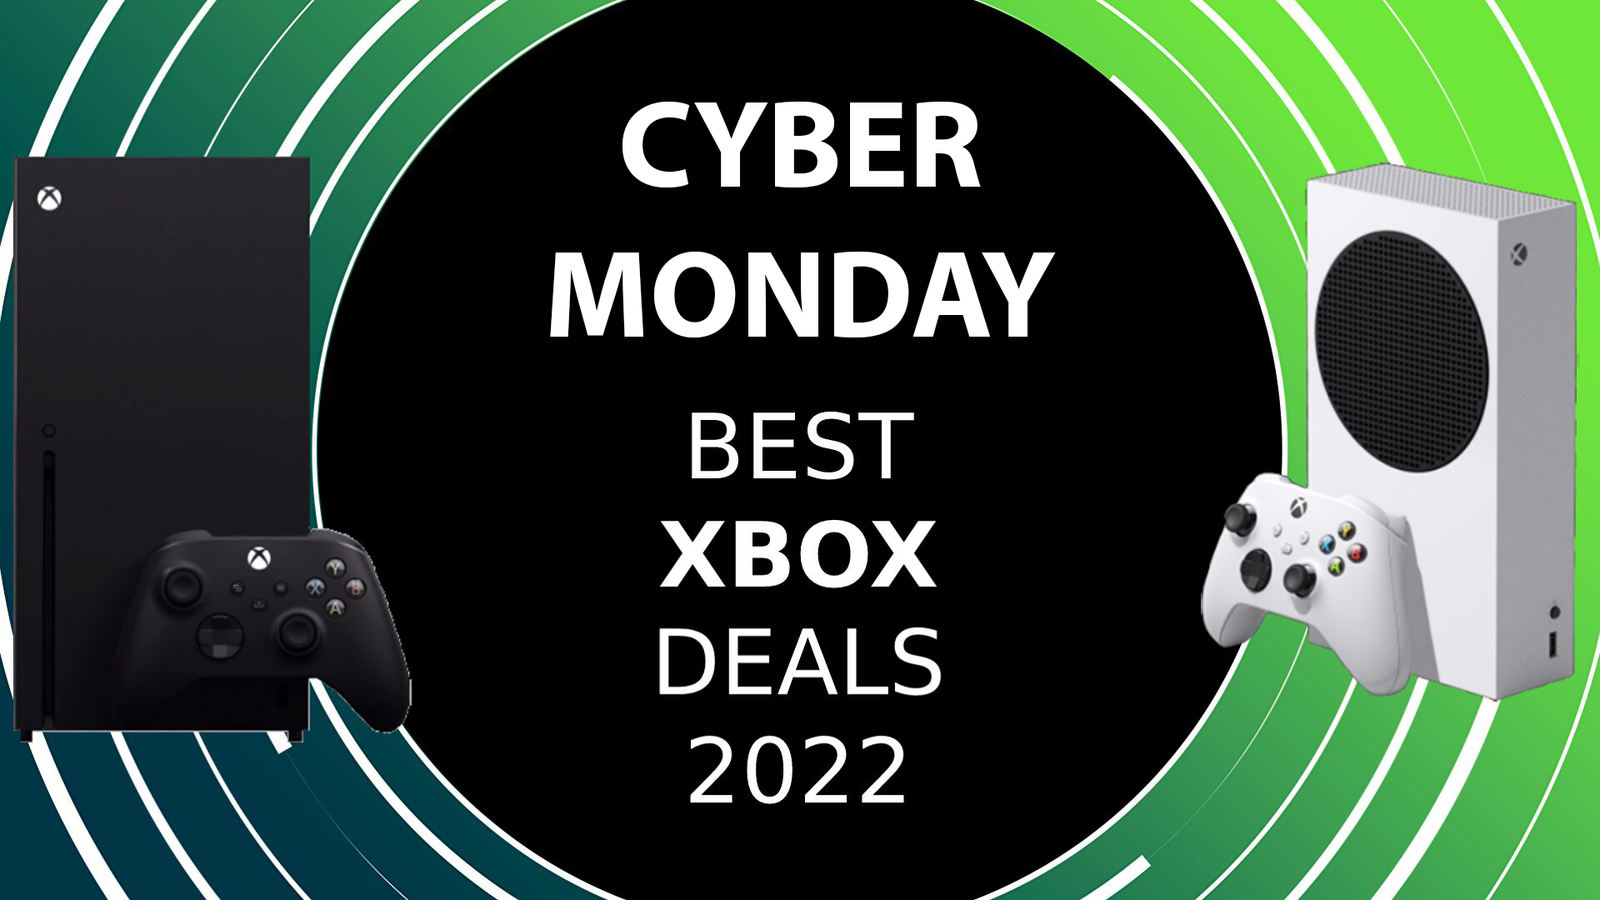 Xbox Game Pass Ultimate 3 Months is $25 in this steep Cyber Monday deal